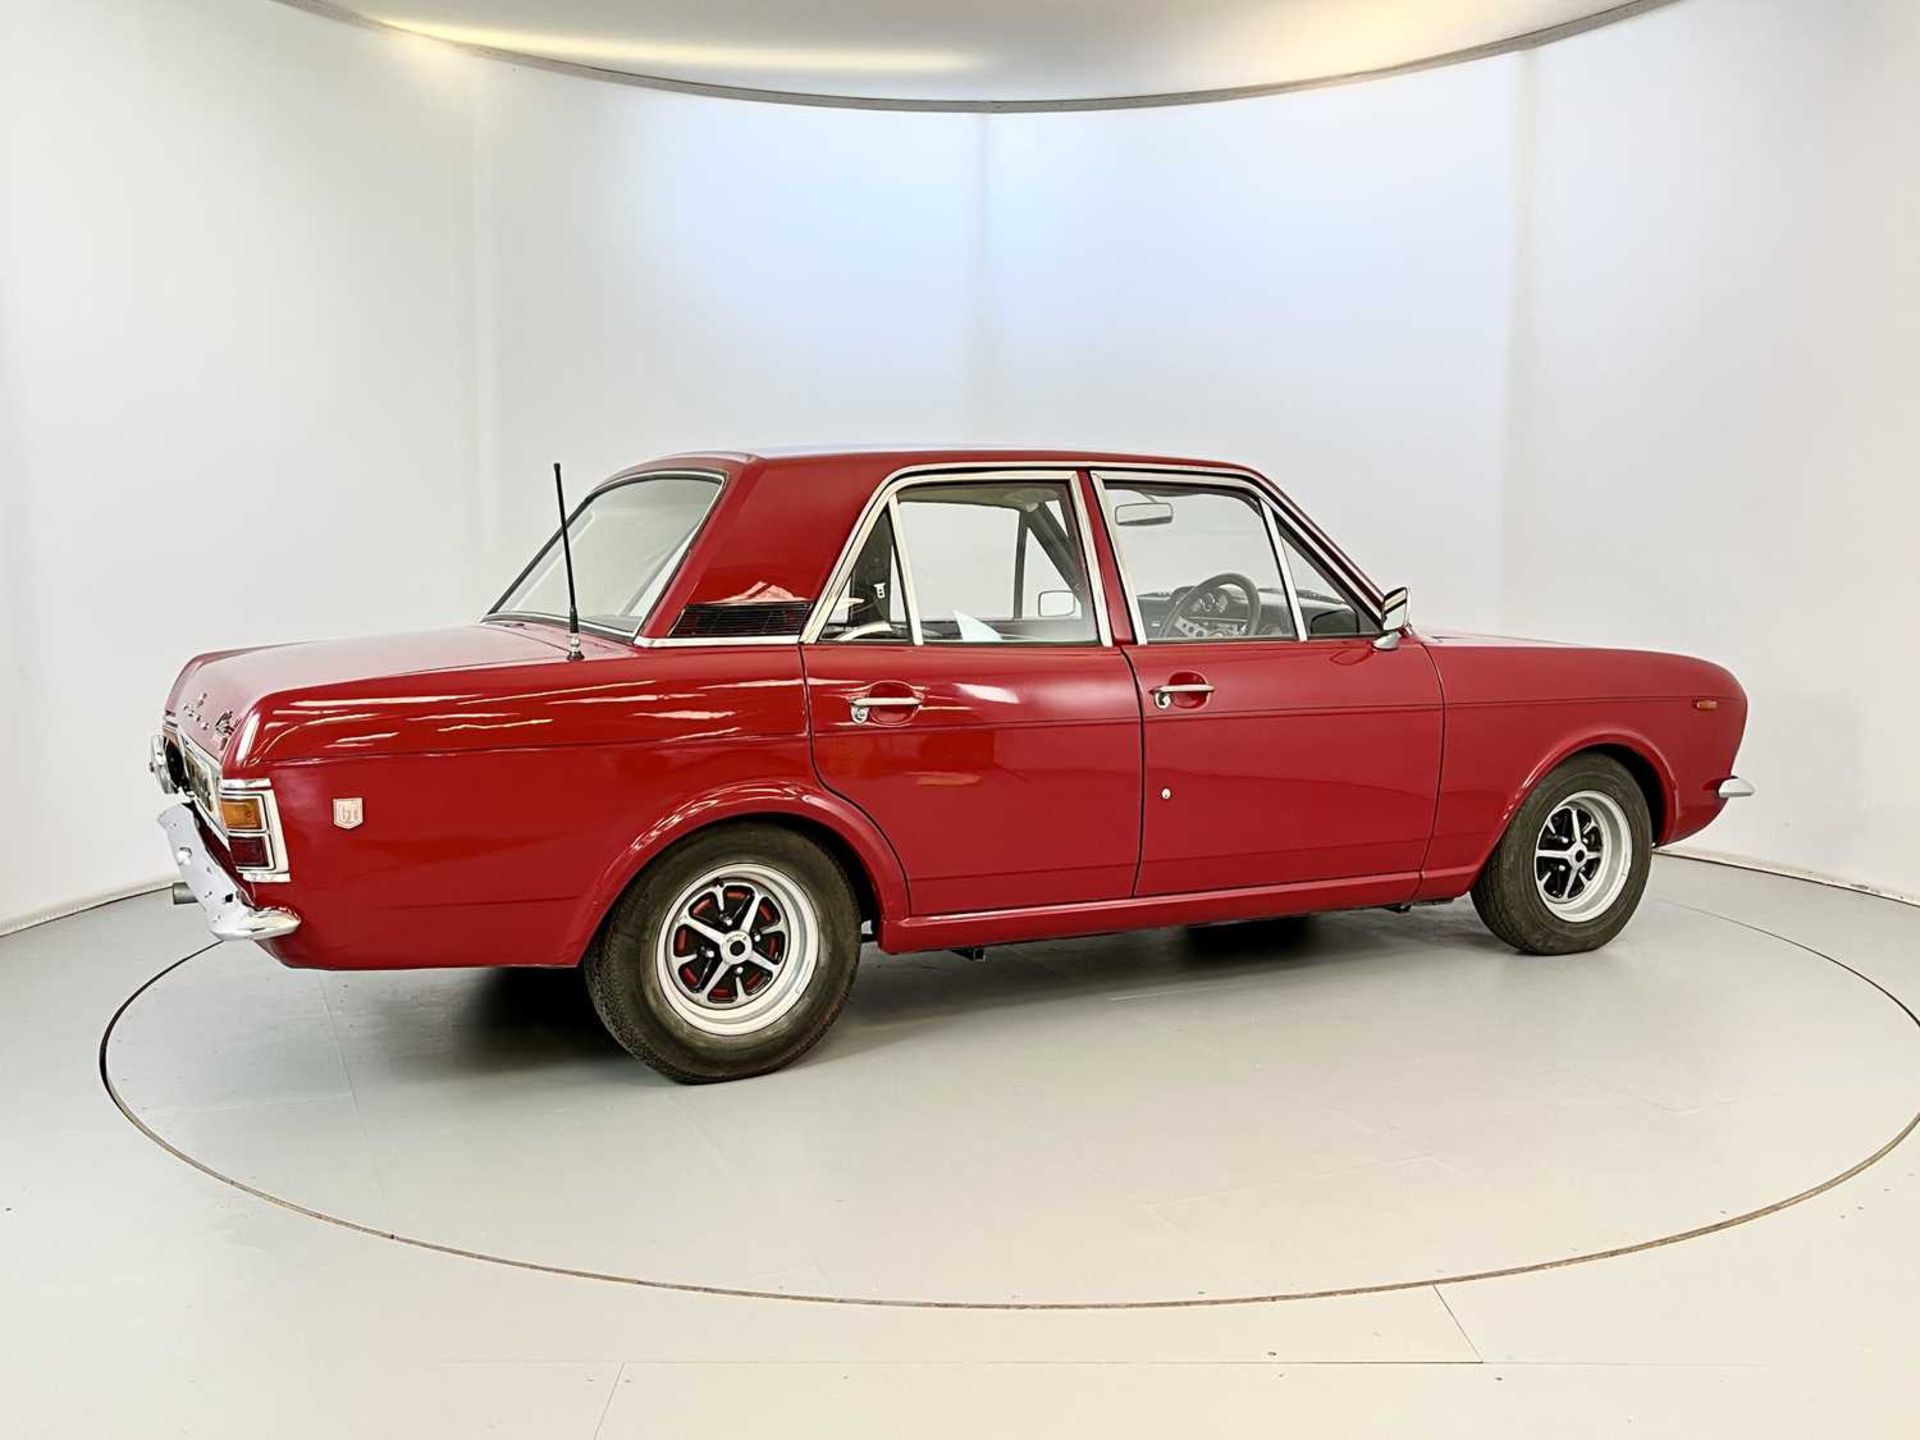 1967 Ford Cortina 1600GT - Image 10 of 37